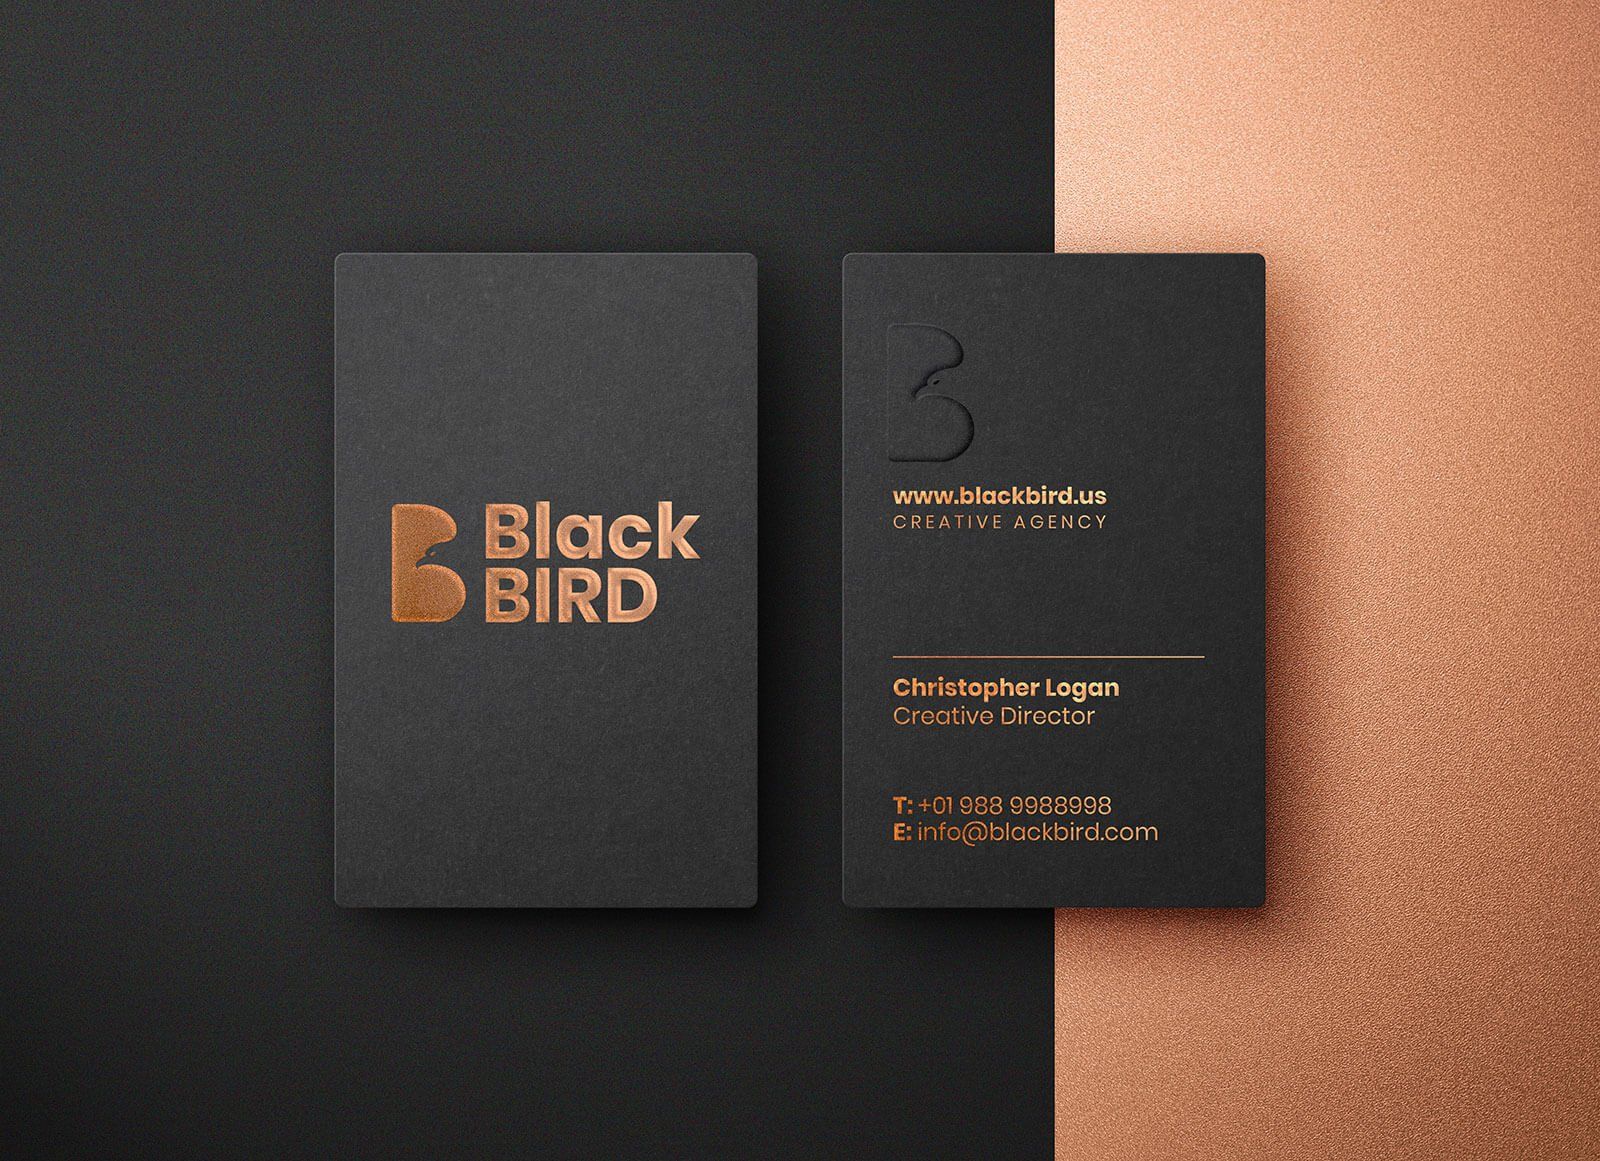 Professional business cards